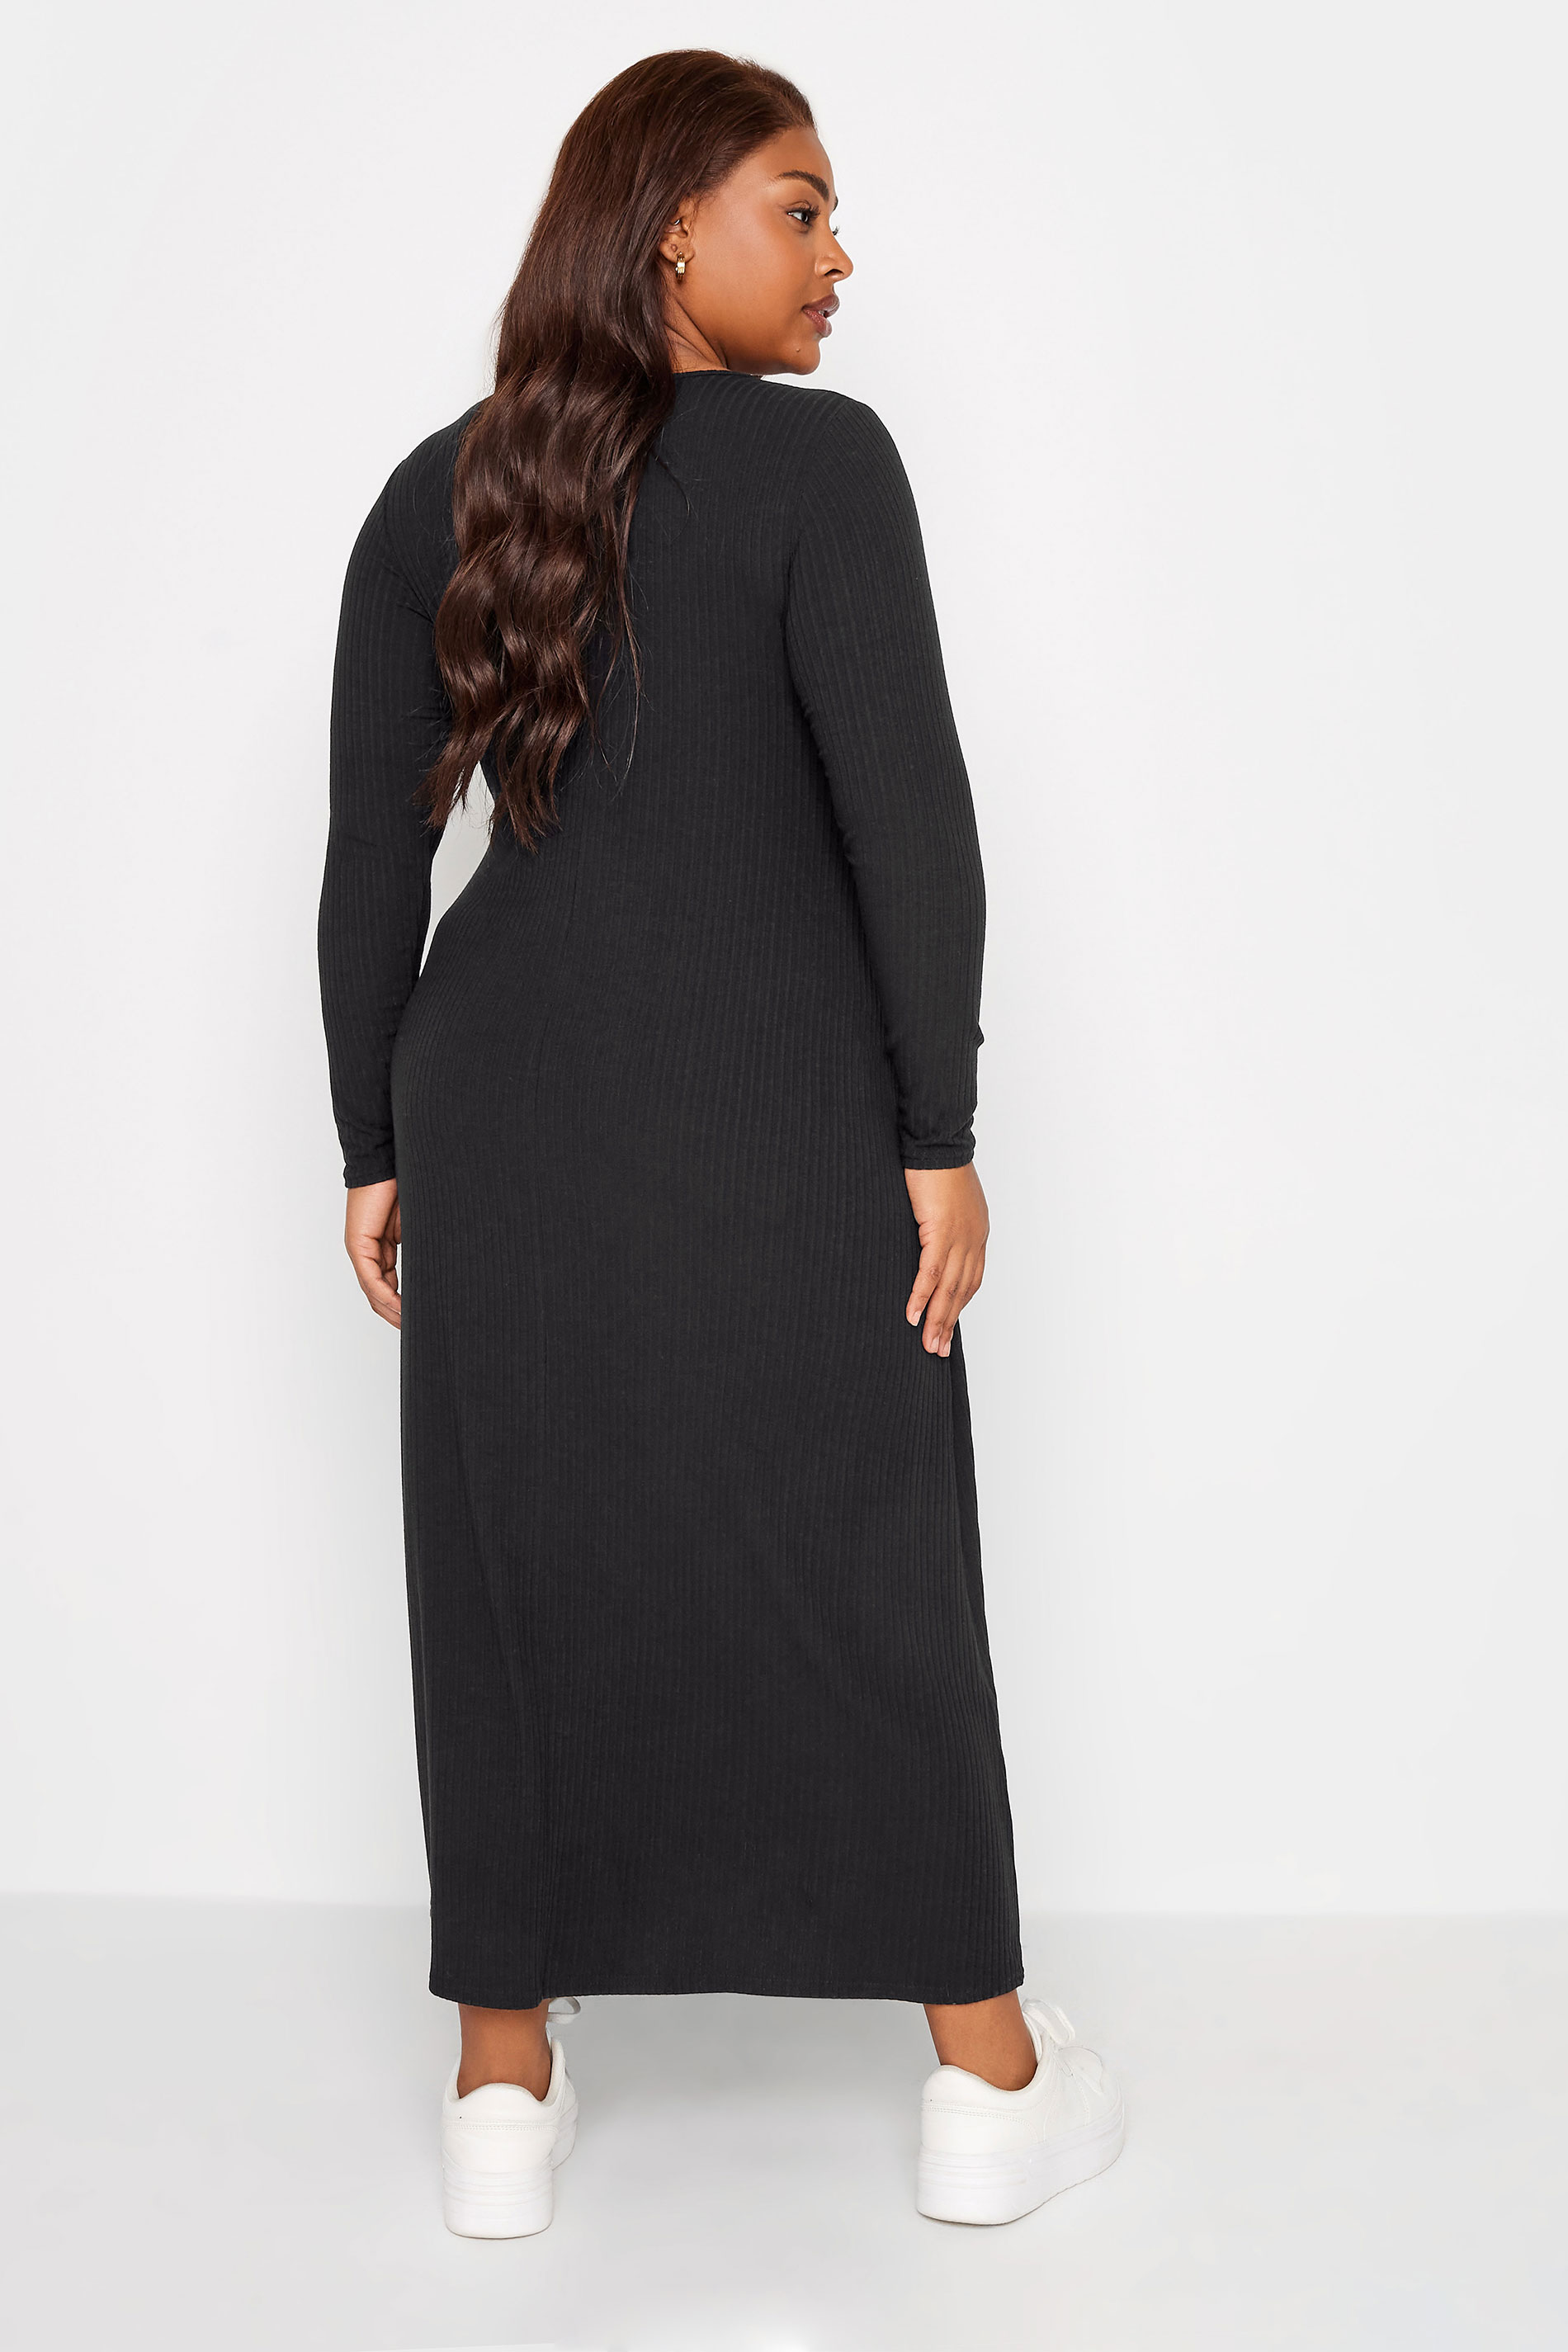 YOURS Curve Plus Size Black Ribbed Maxi Swing Dress | Yours Clothing  3